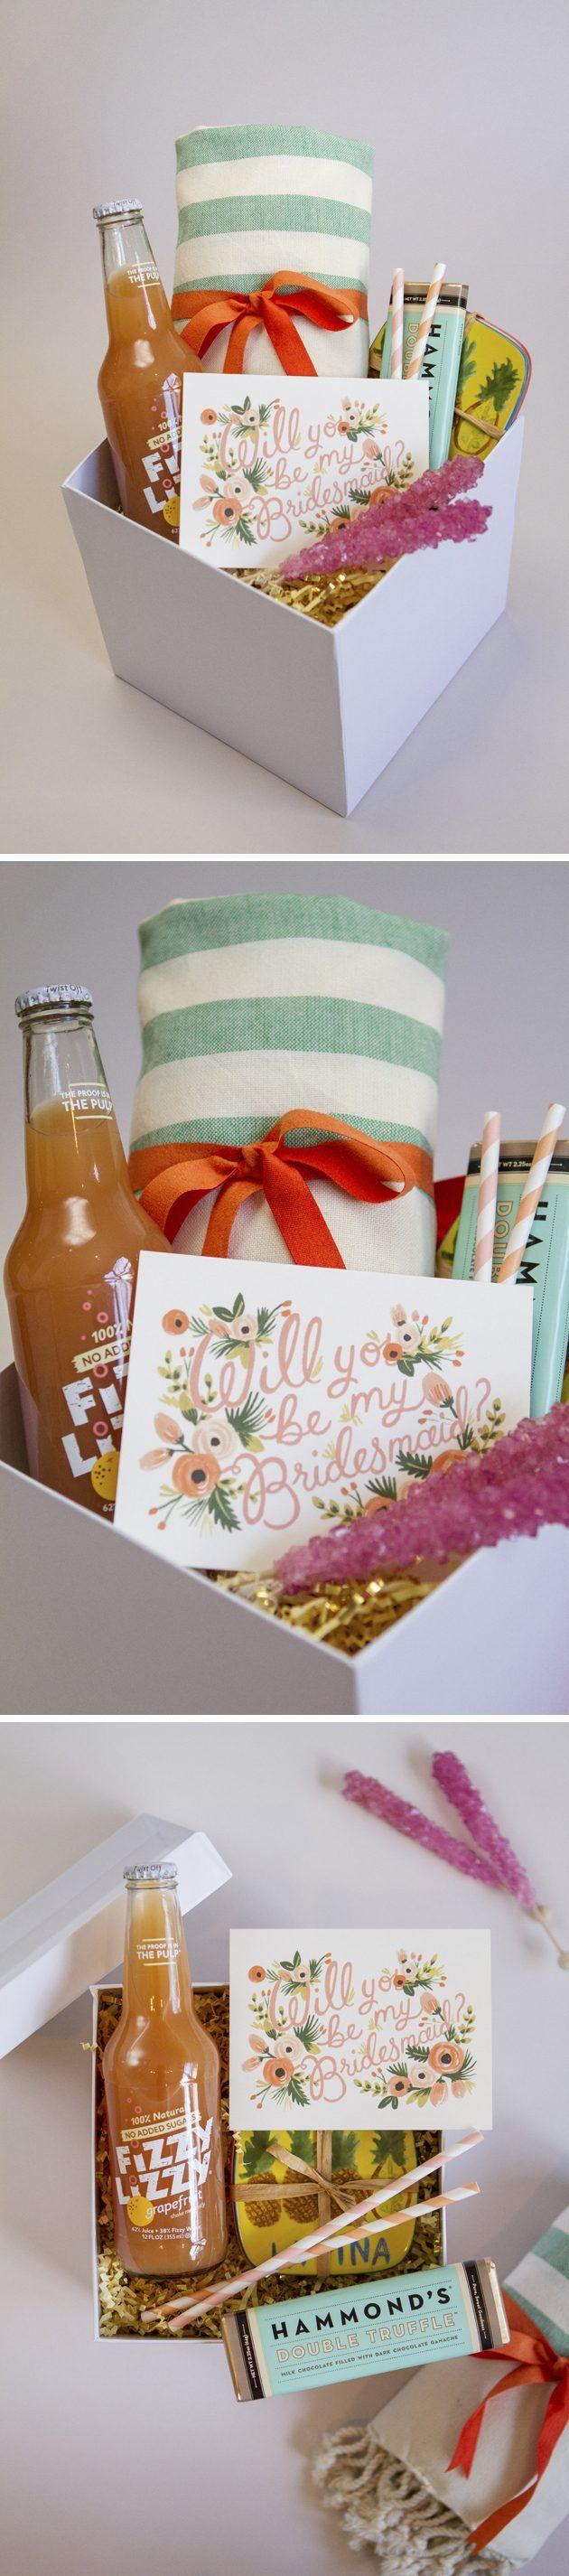 Свадьба - How To Make A "Will You Be My Bridesmaid?" Box